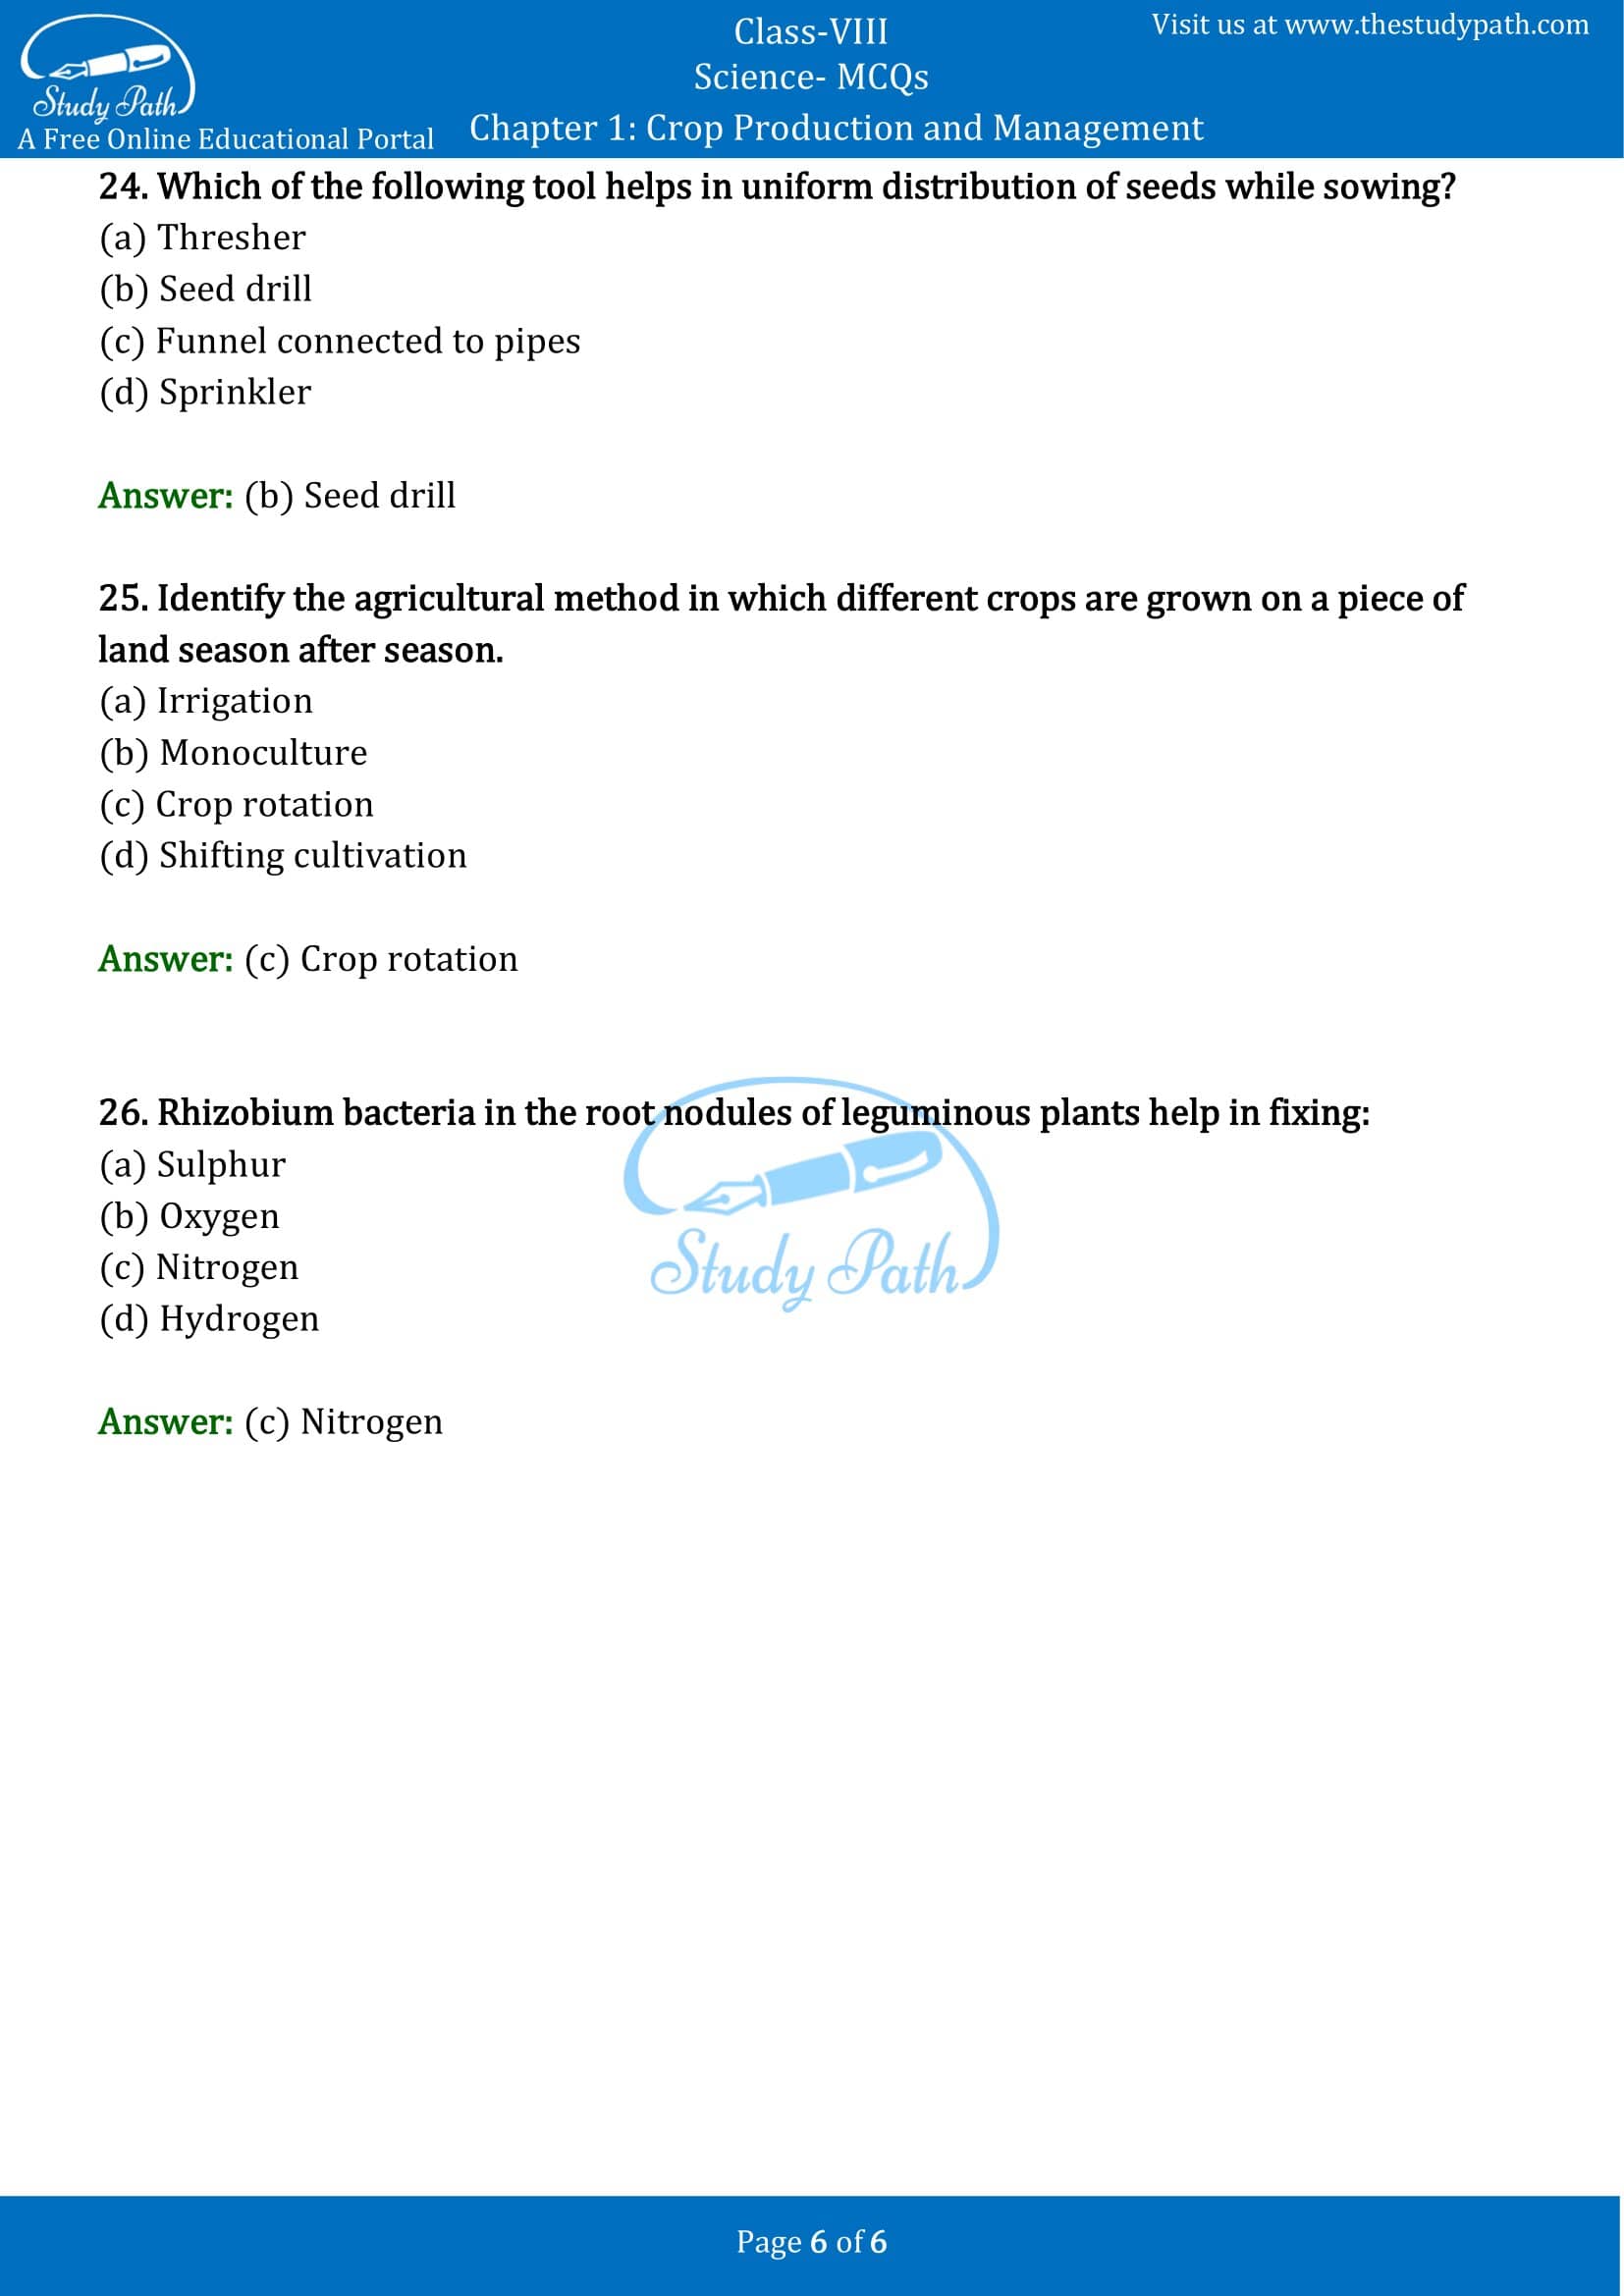 MCQ Questions for Class 8 Science Chapter 1 Crop Production and Management with Answers PDF -6